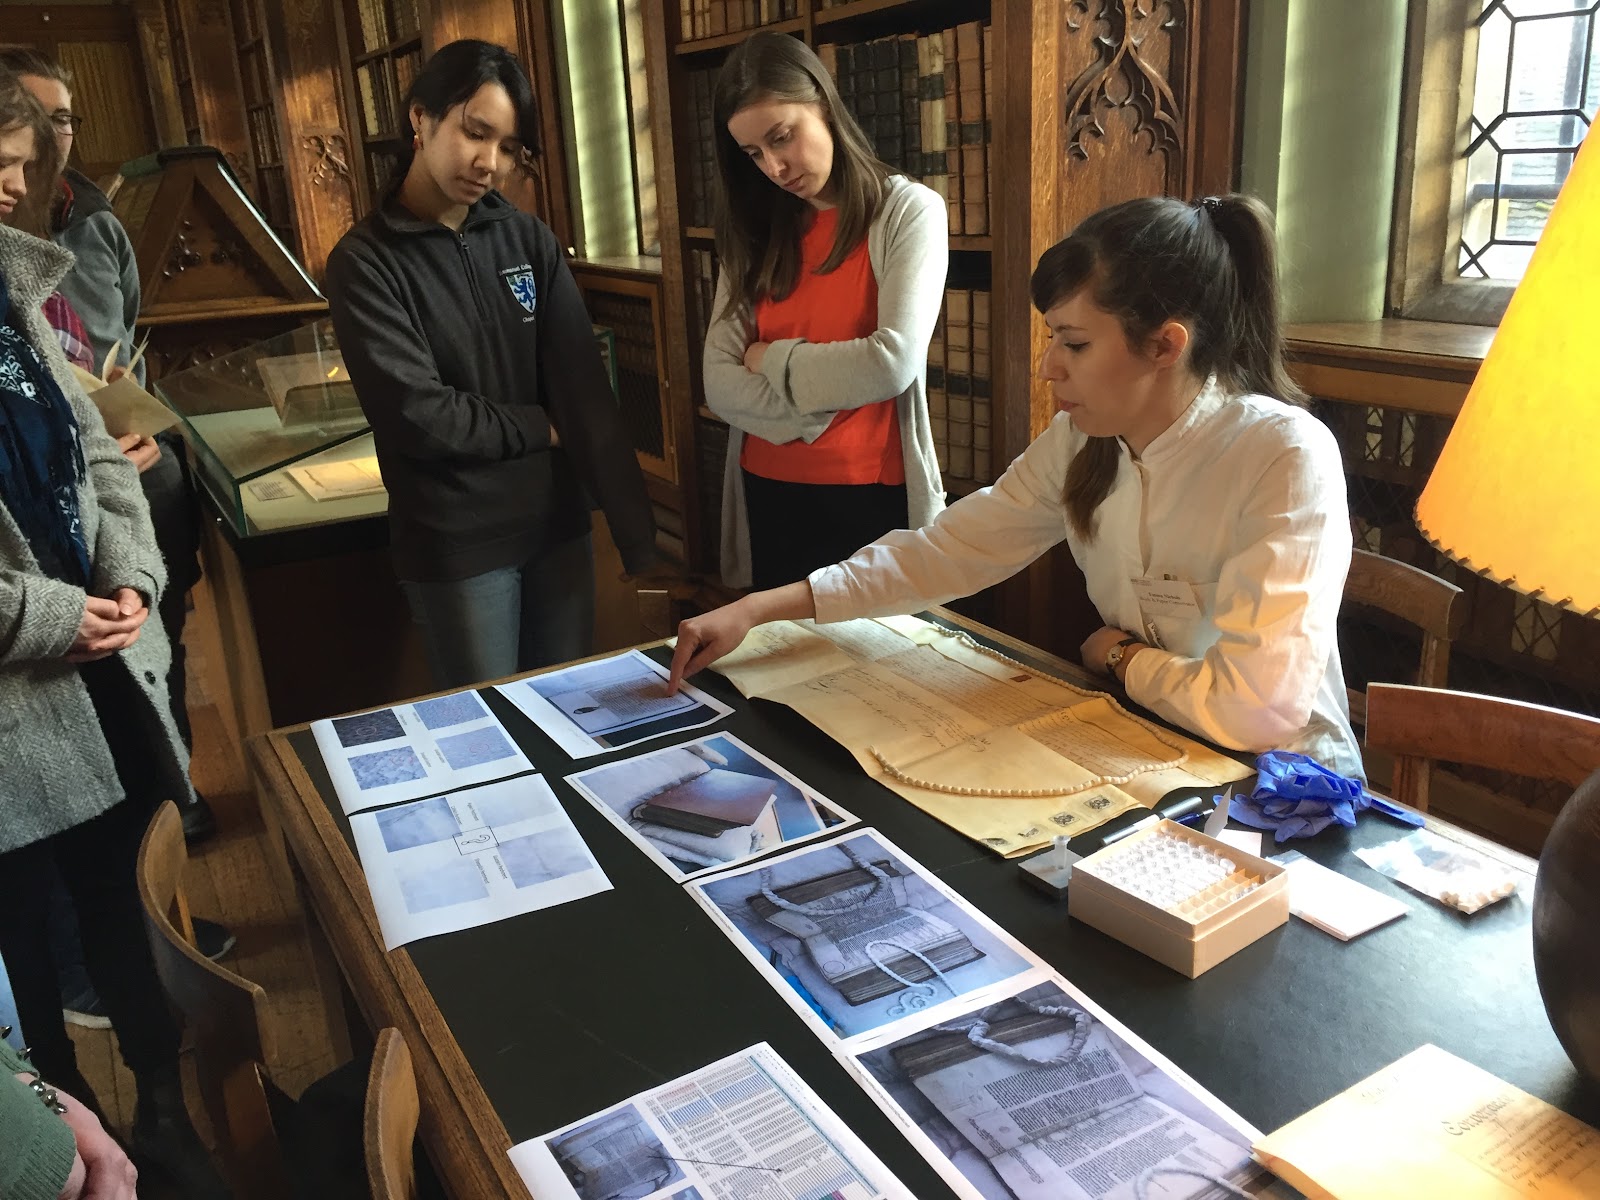 An Introduction to Biocodicology and the Beasts 2 Craft Project | The ...